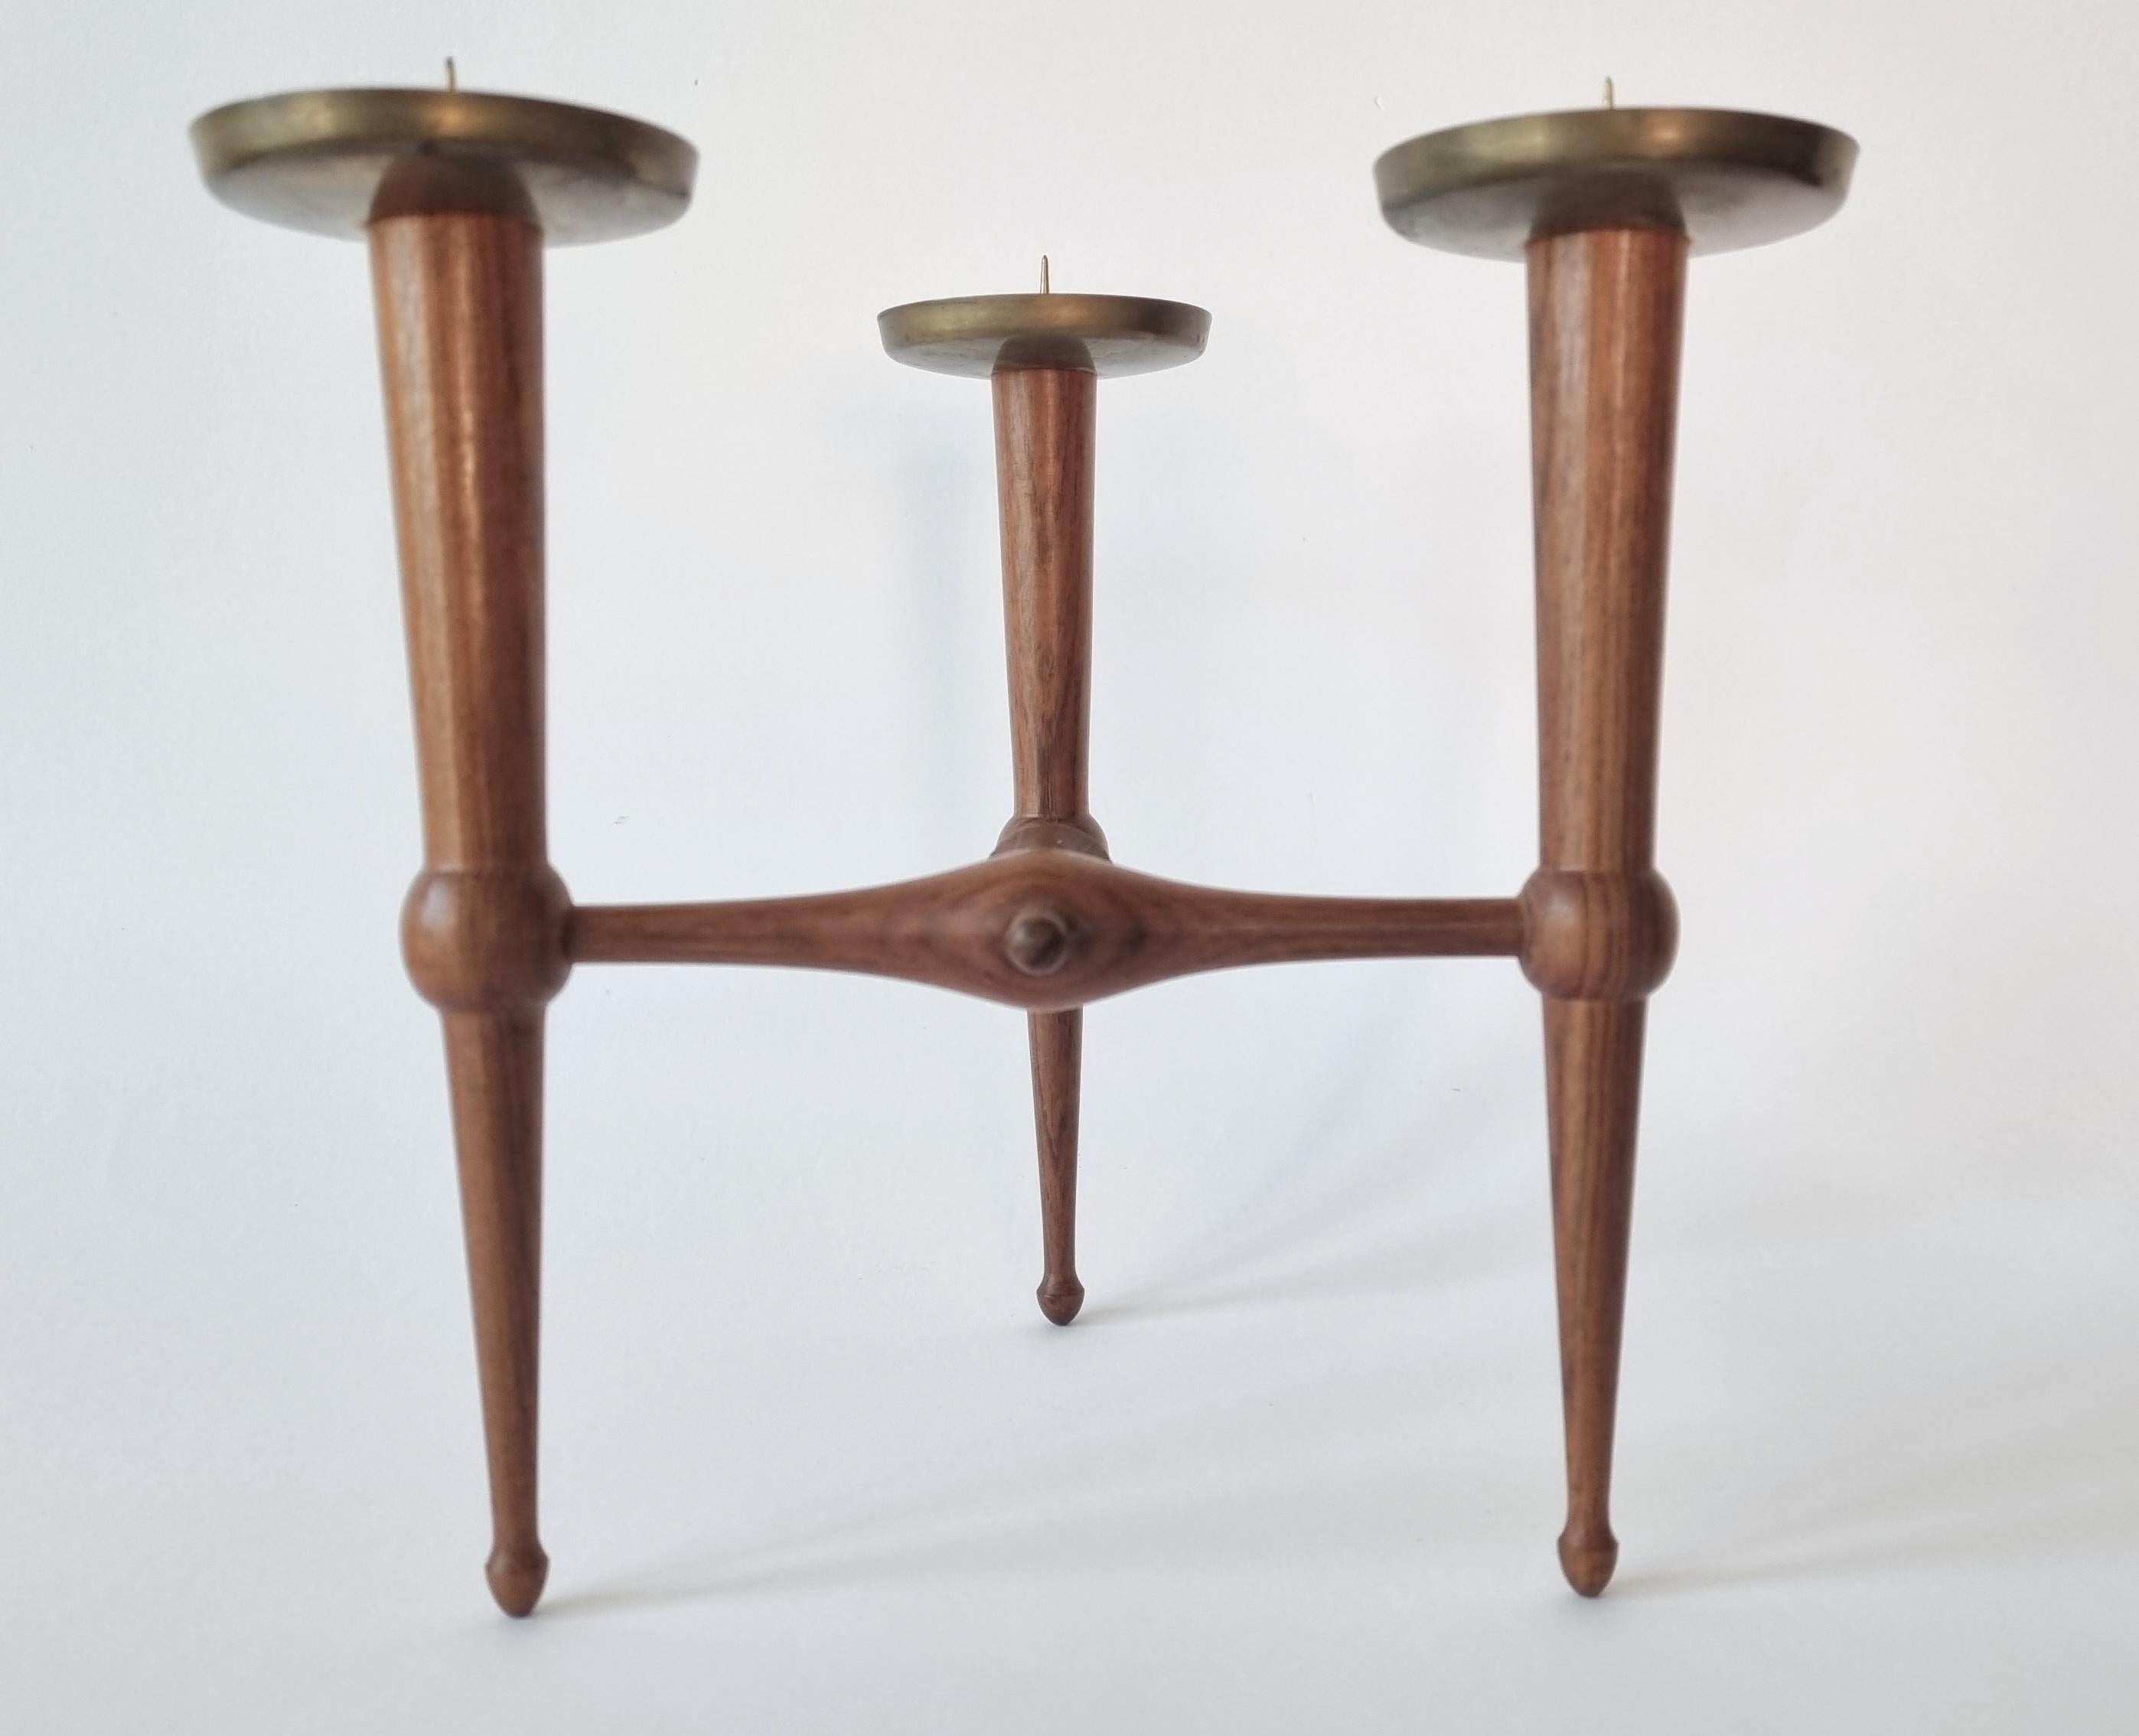 Midcentury Teak and Brass Rare Table Candle Holder / Stick, Denmark, 1960s For Sale 11